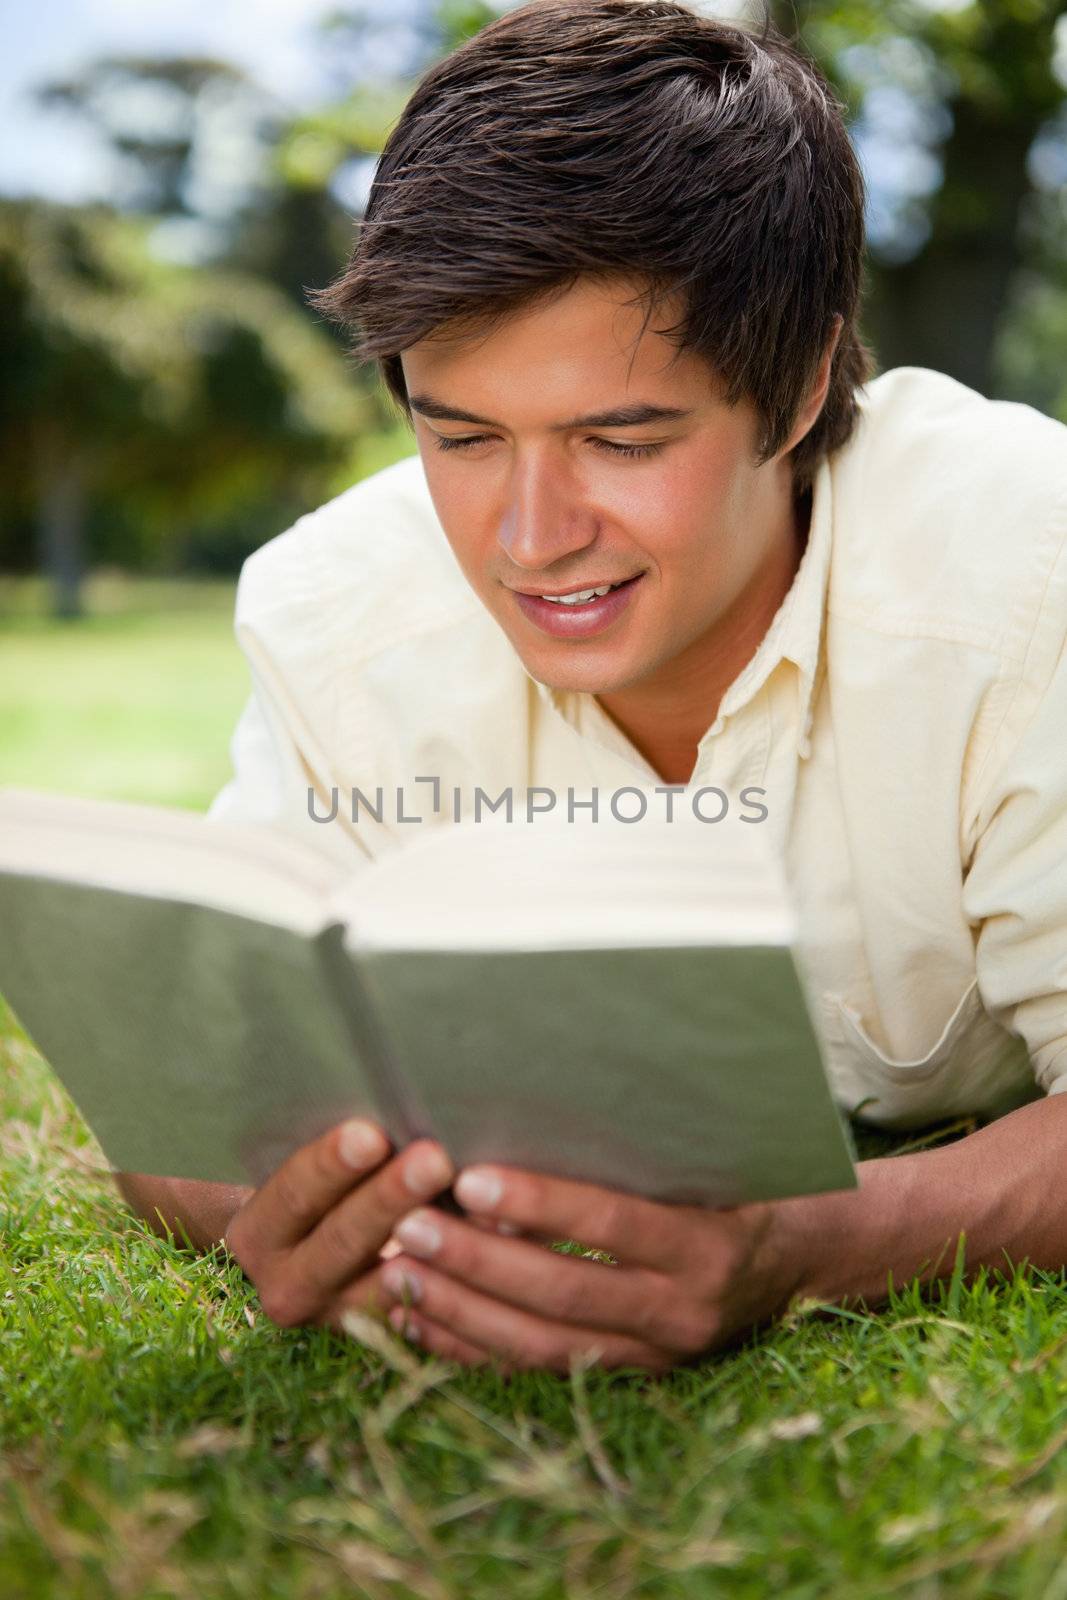 Man smiles while he reads a book as he lies prone on the grass